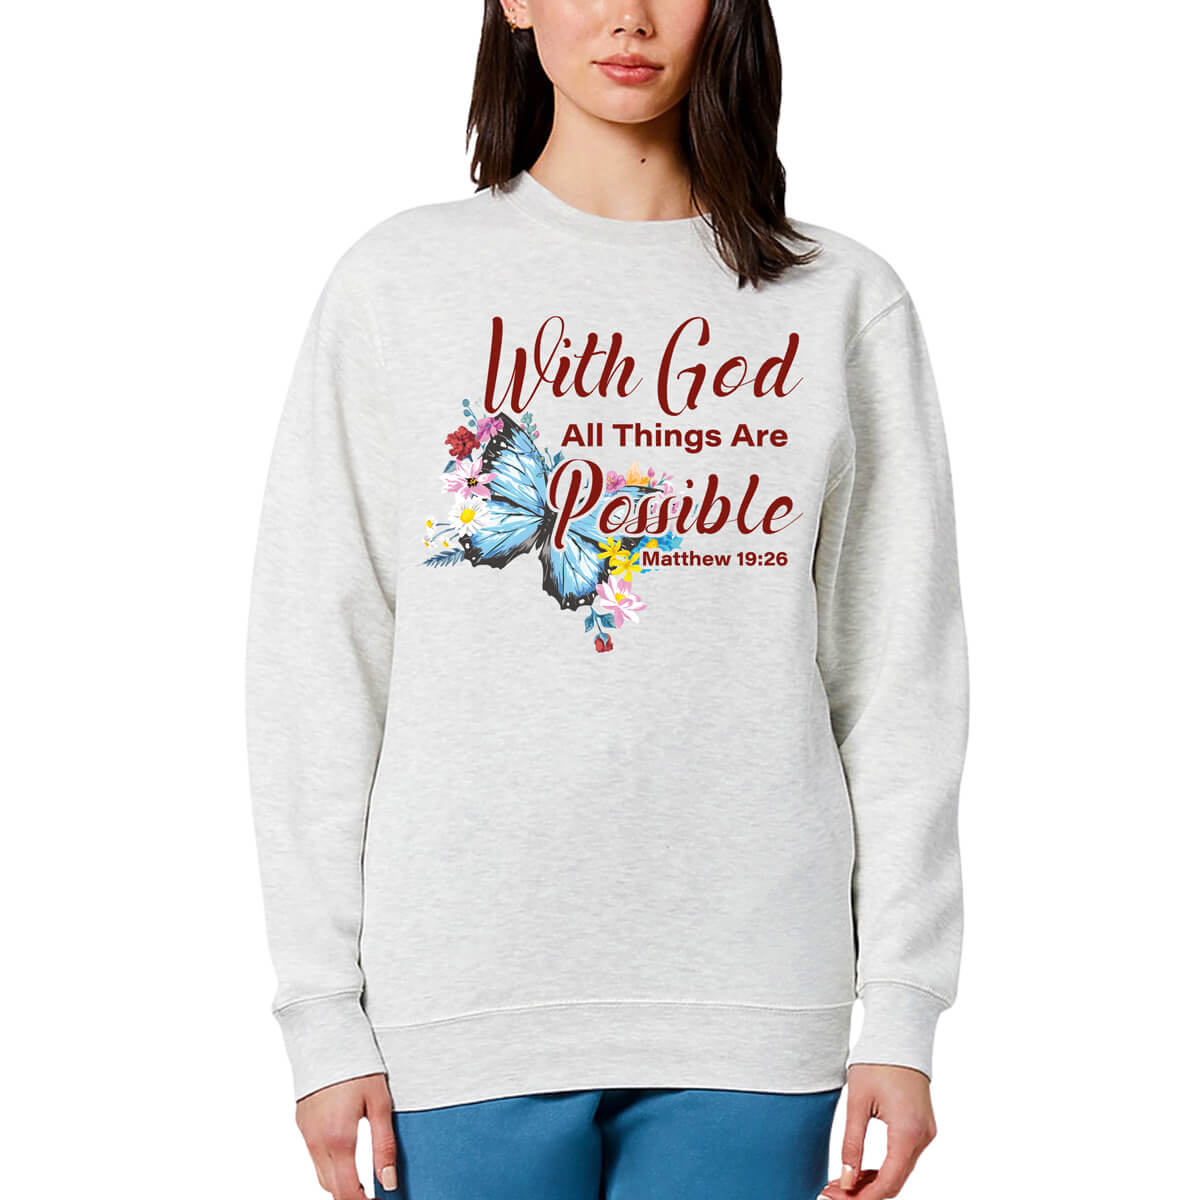 With God All Things Are Possible Crewneck Sweatshirt